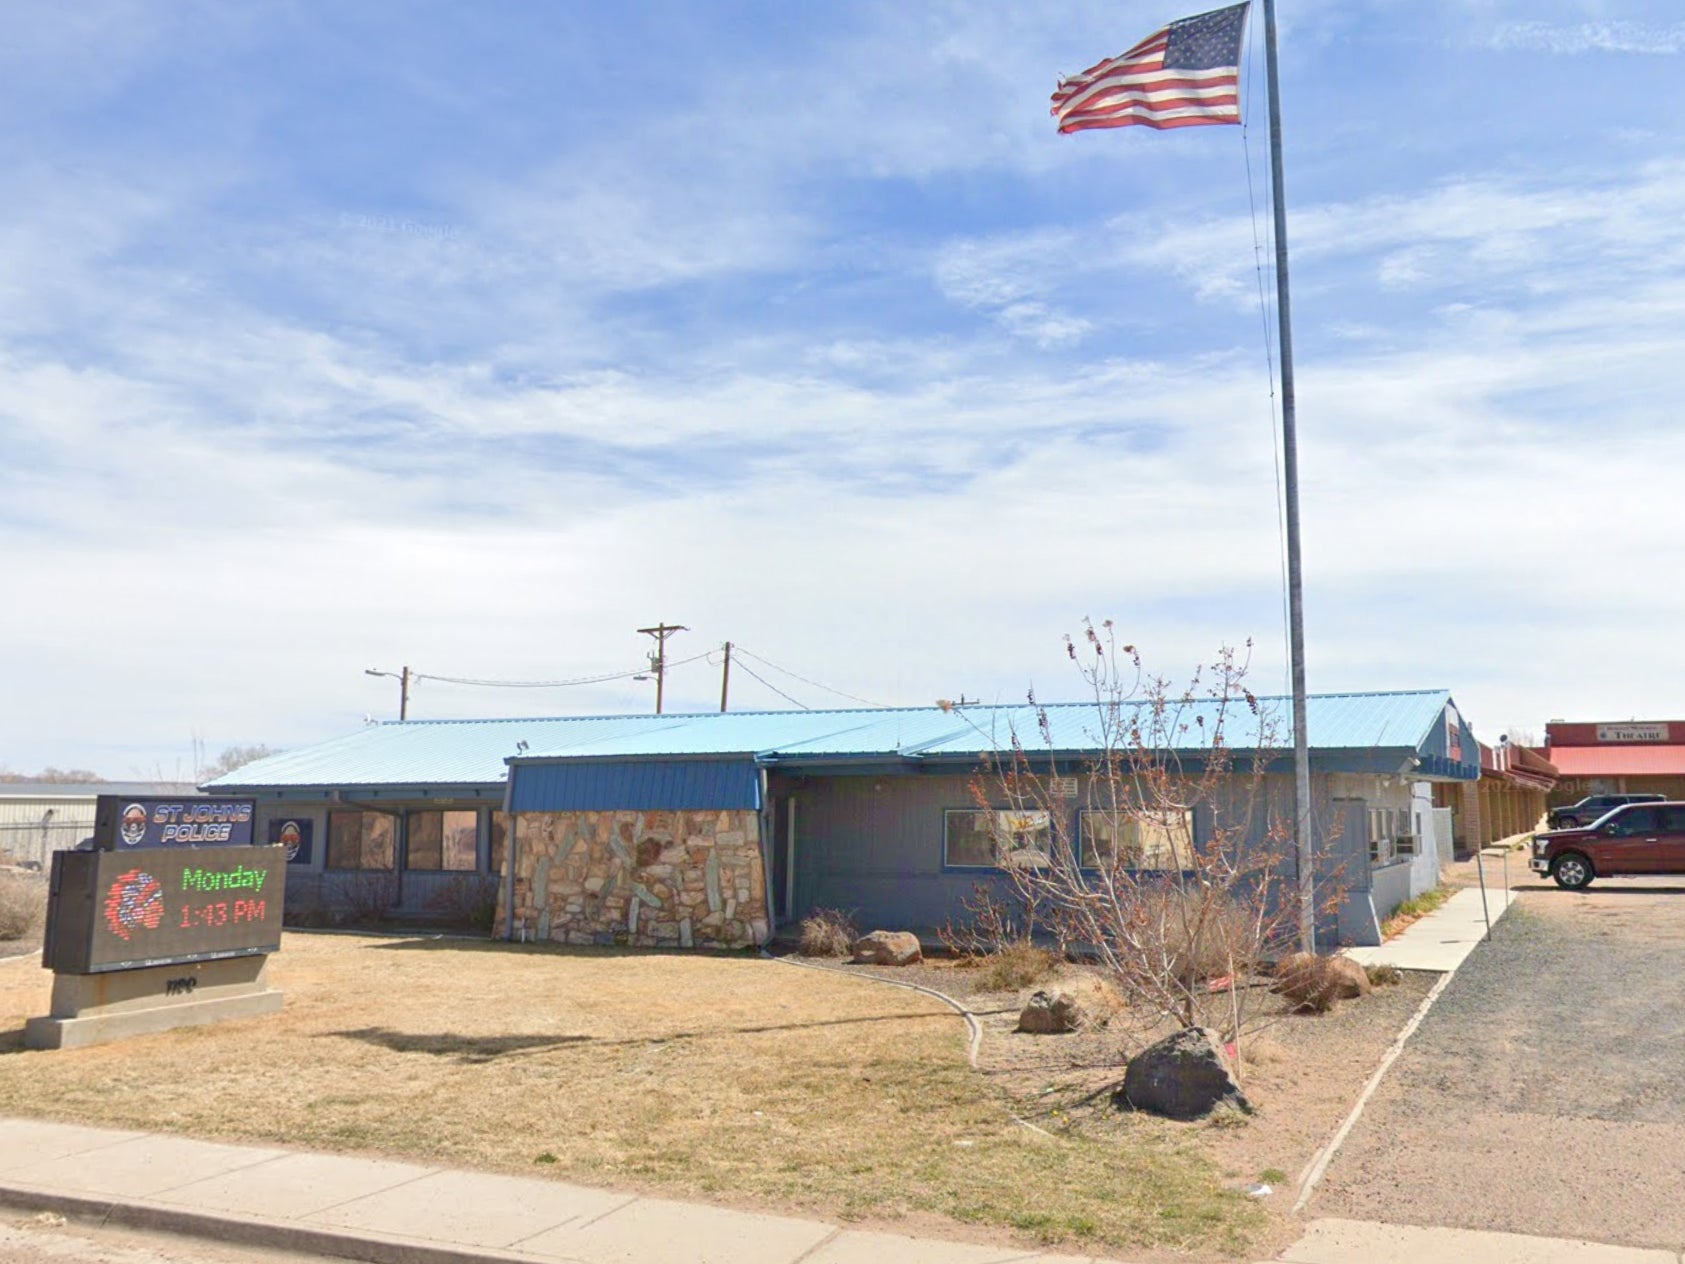 The St John’s Police Department office in St John’s, Arizona. A man in the town died after cell and internet service was knocked out for 48 hours due to criminal activity.